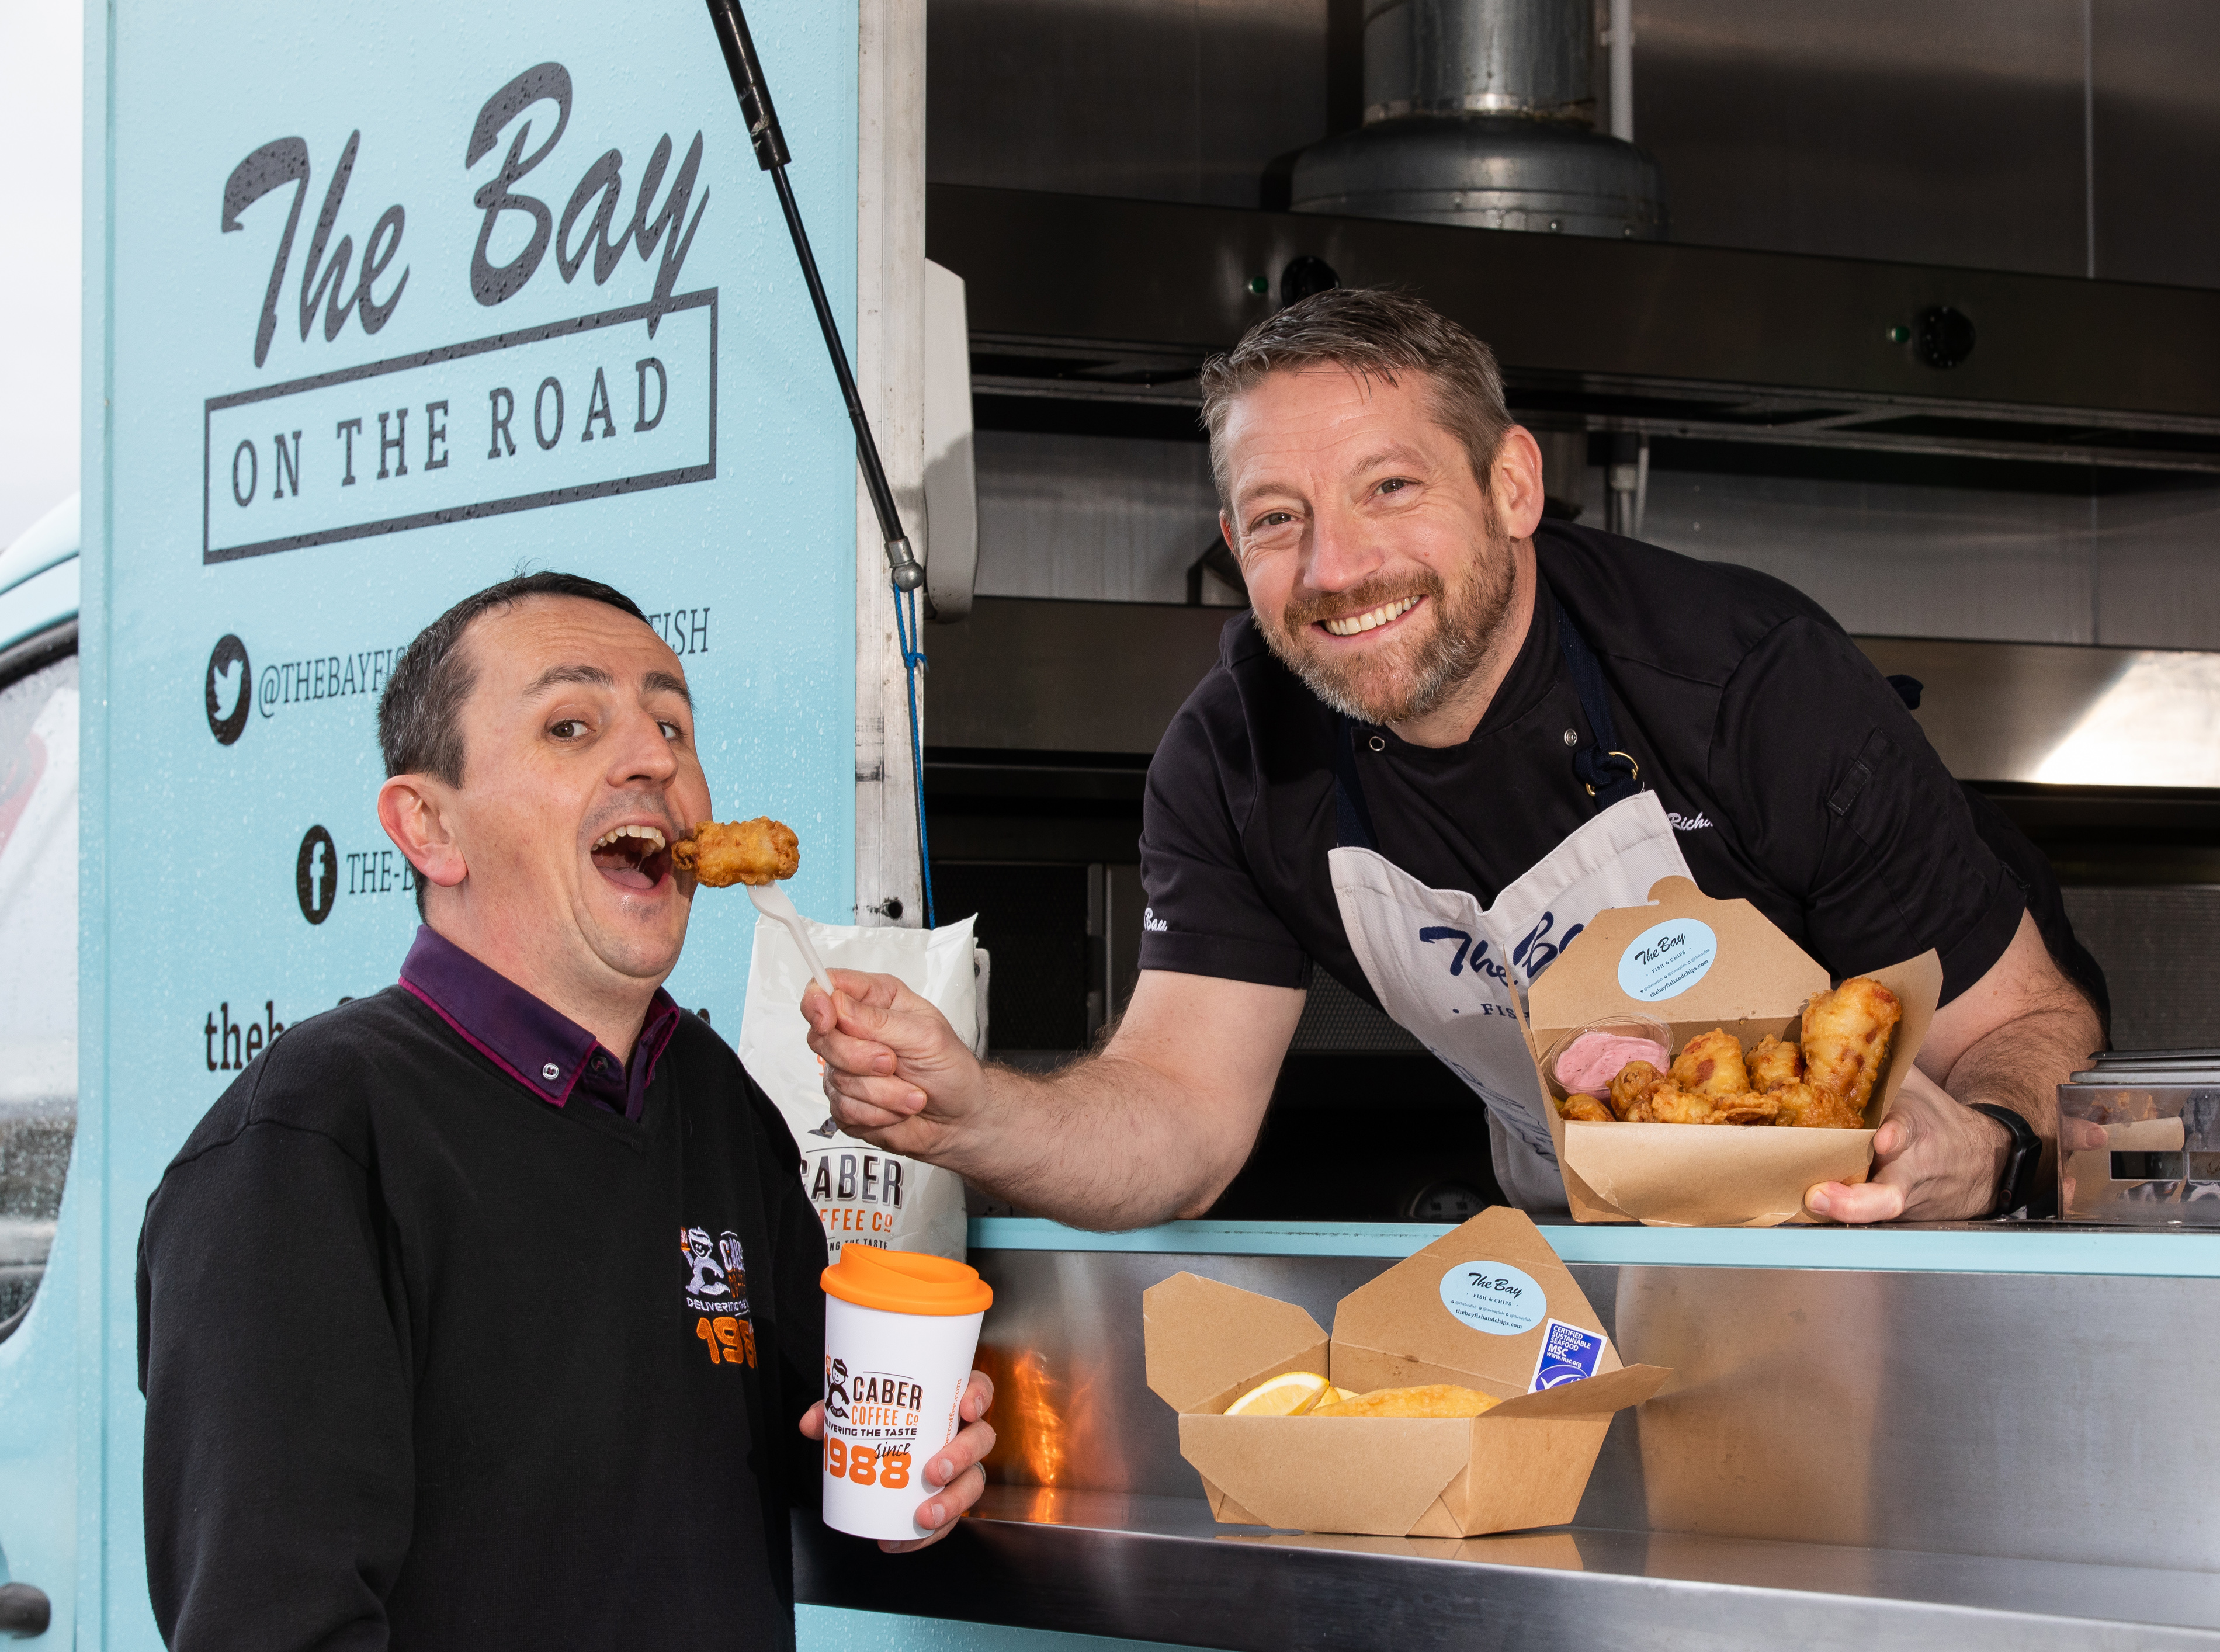 Calum Richardson from The Bay Fish and Chips and Findlay Leask from Caber Coffee who will be raising funds for CFINE by selling pigs in blankets, fish and chips, and coffee in Aberdeen city centre.